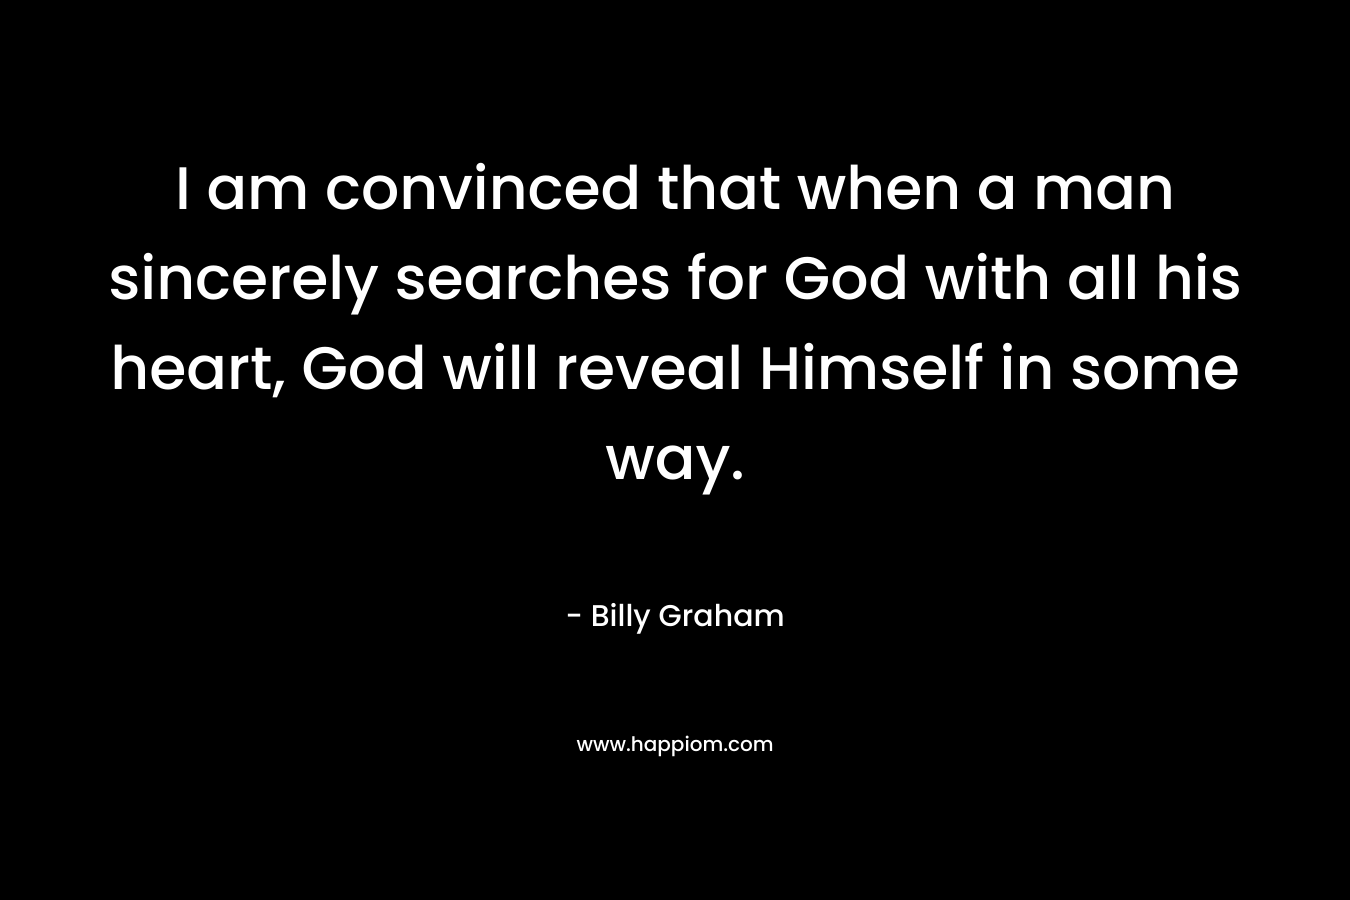 I am convinced that when a man sincerely searches for God with all his heart, God will reveal Himself in some way.